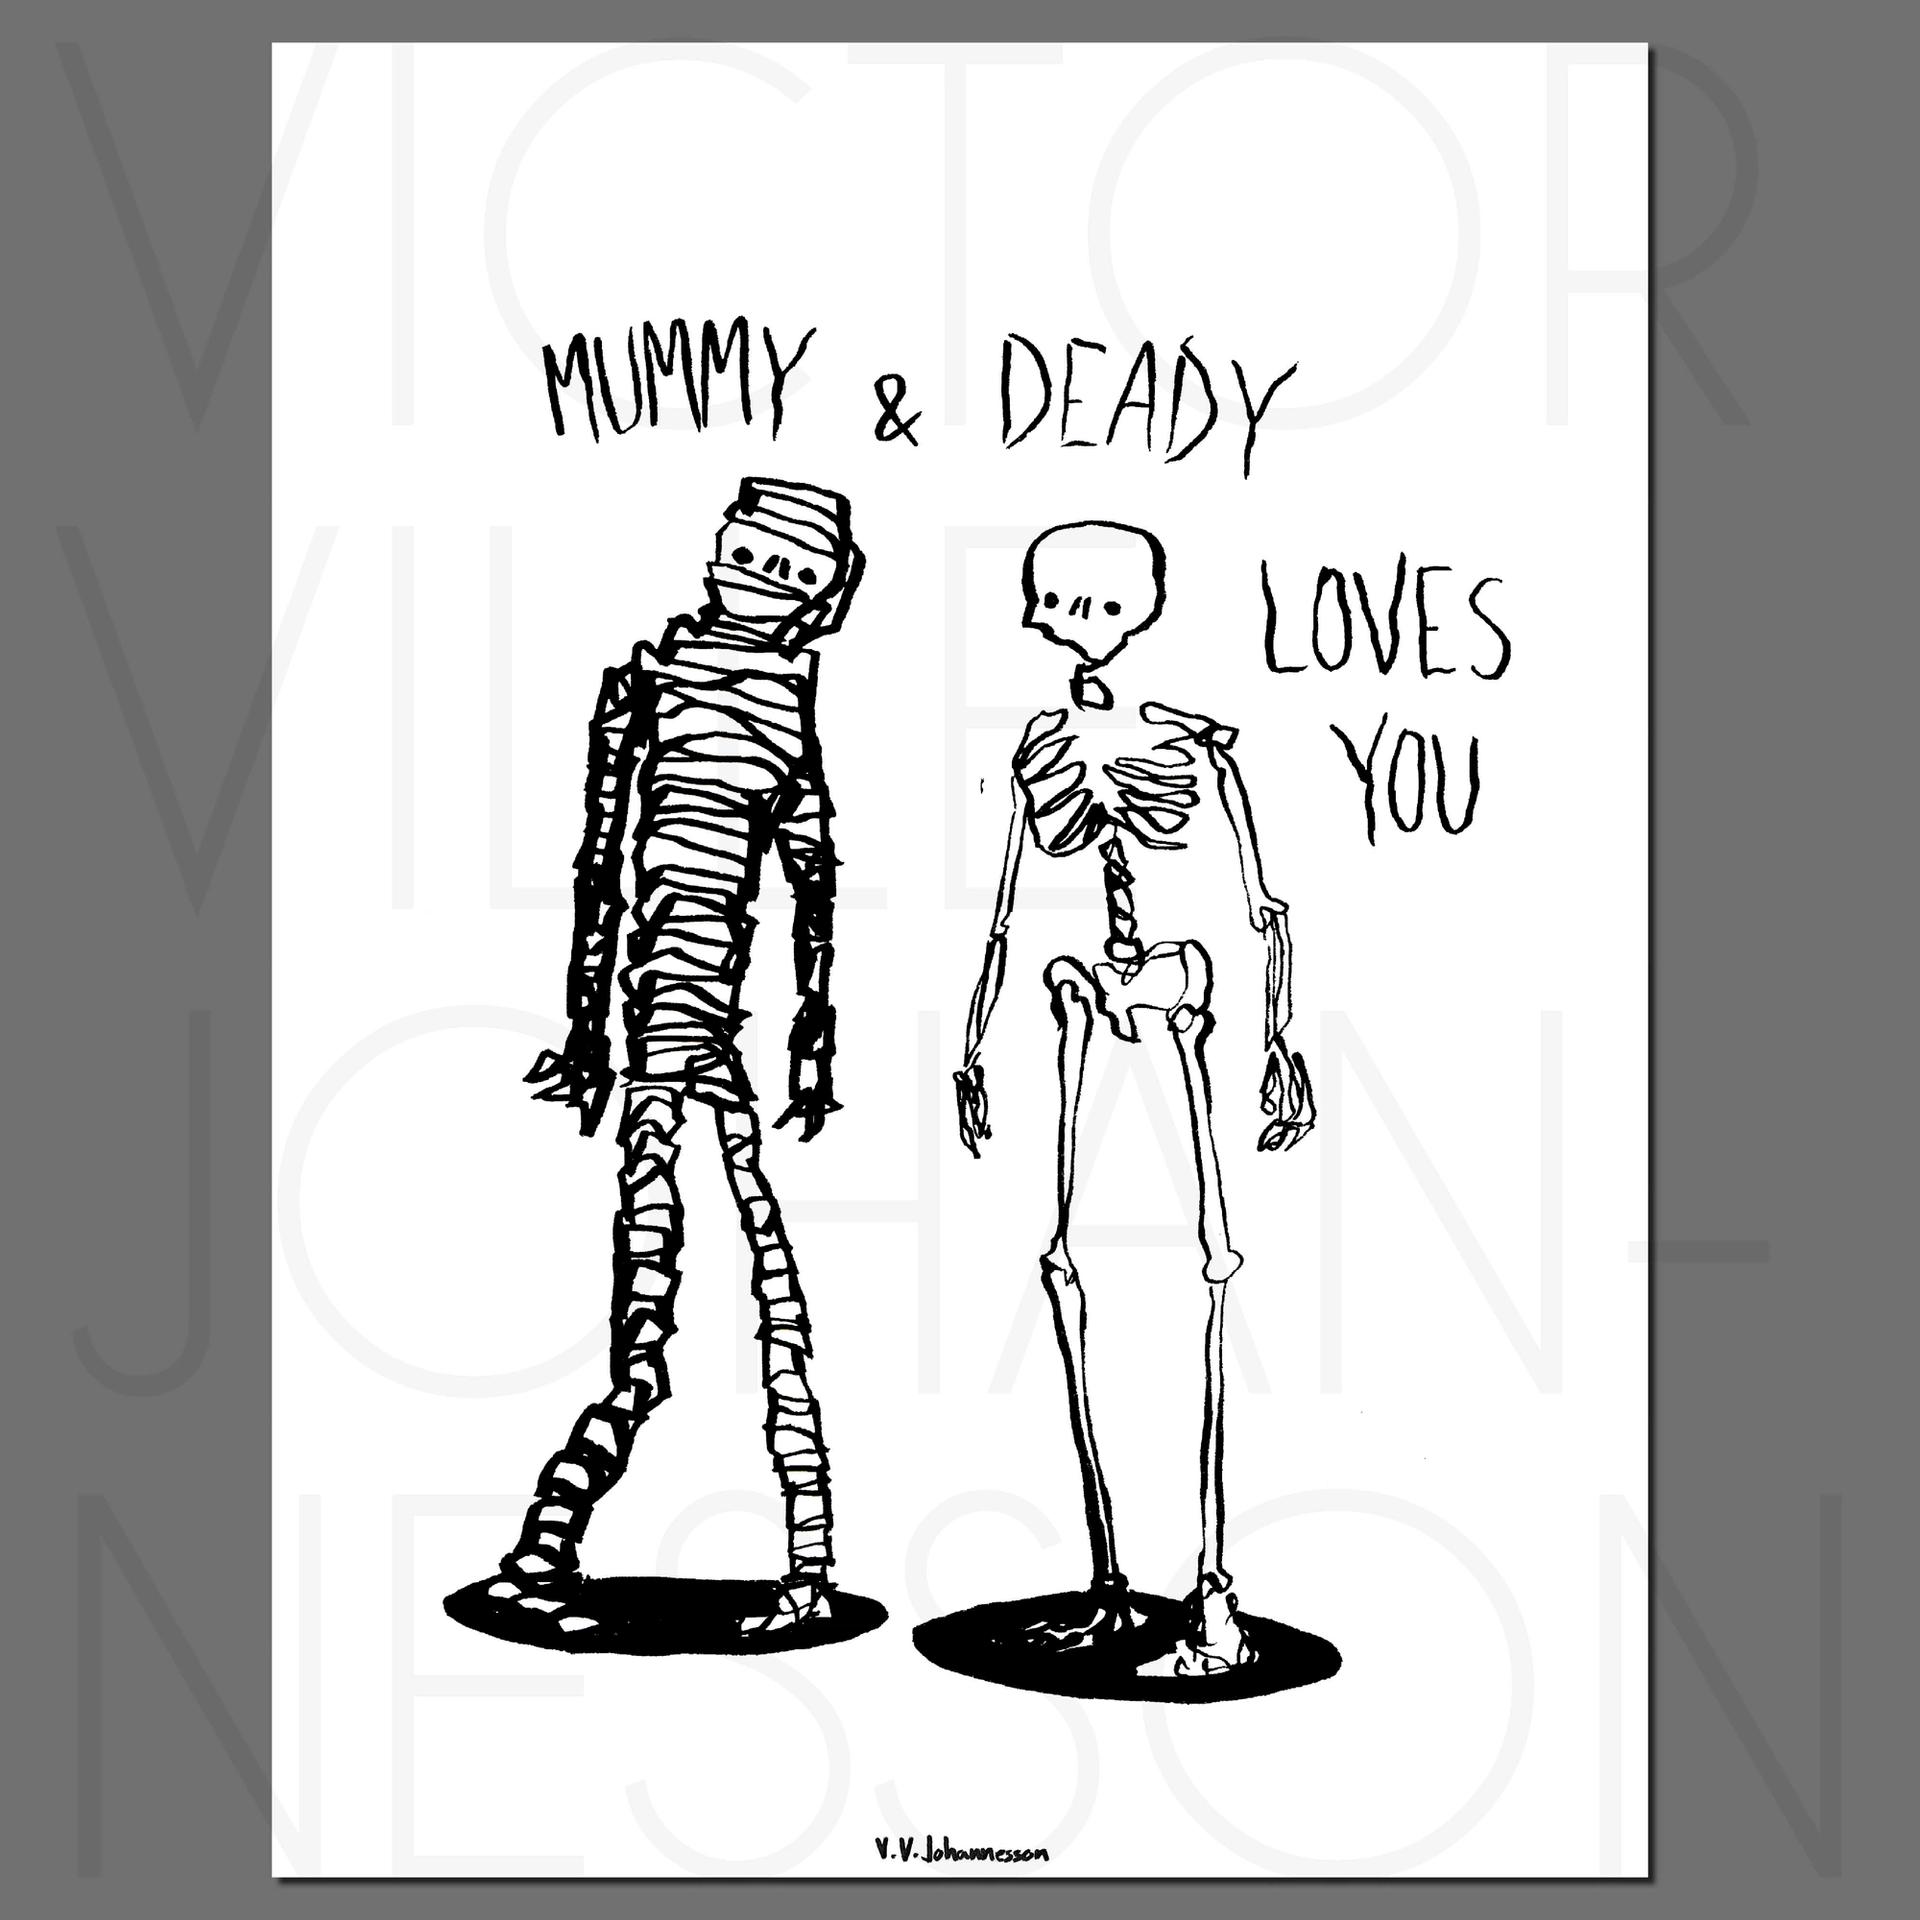 MUMMY AND DEADY.